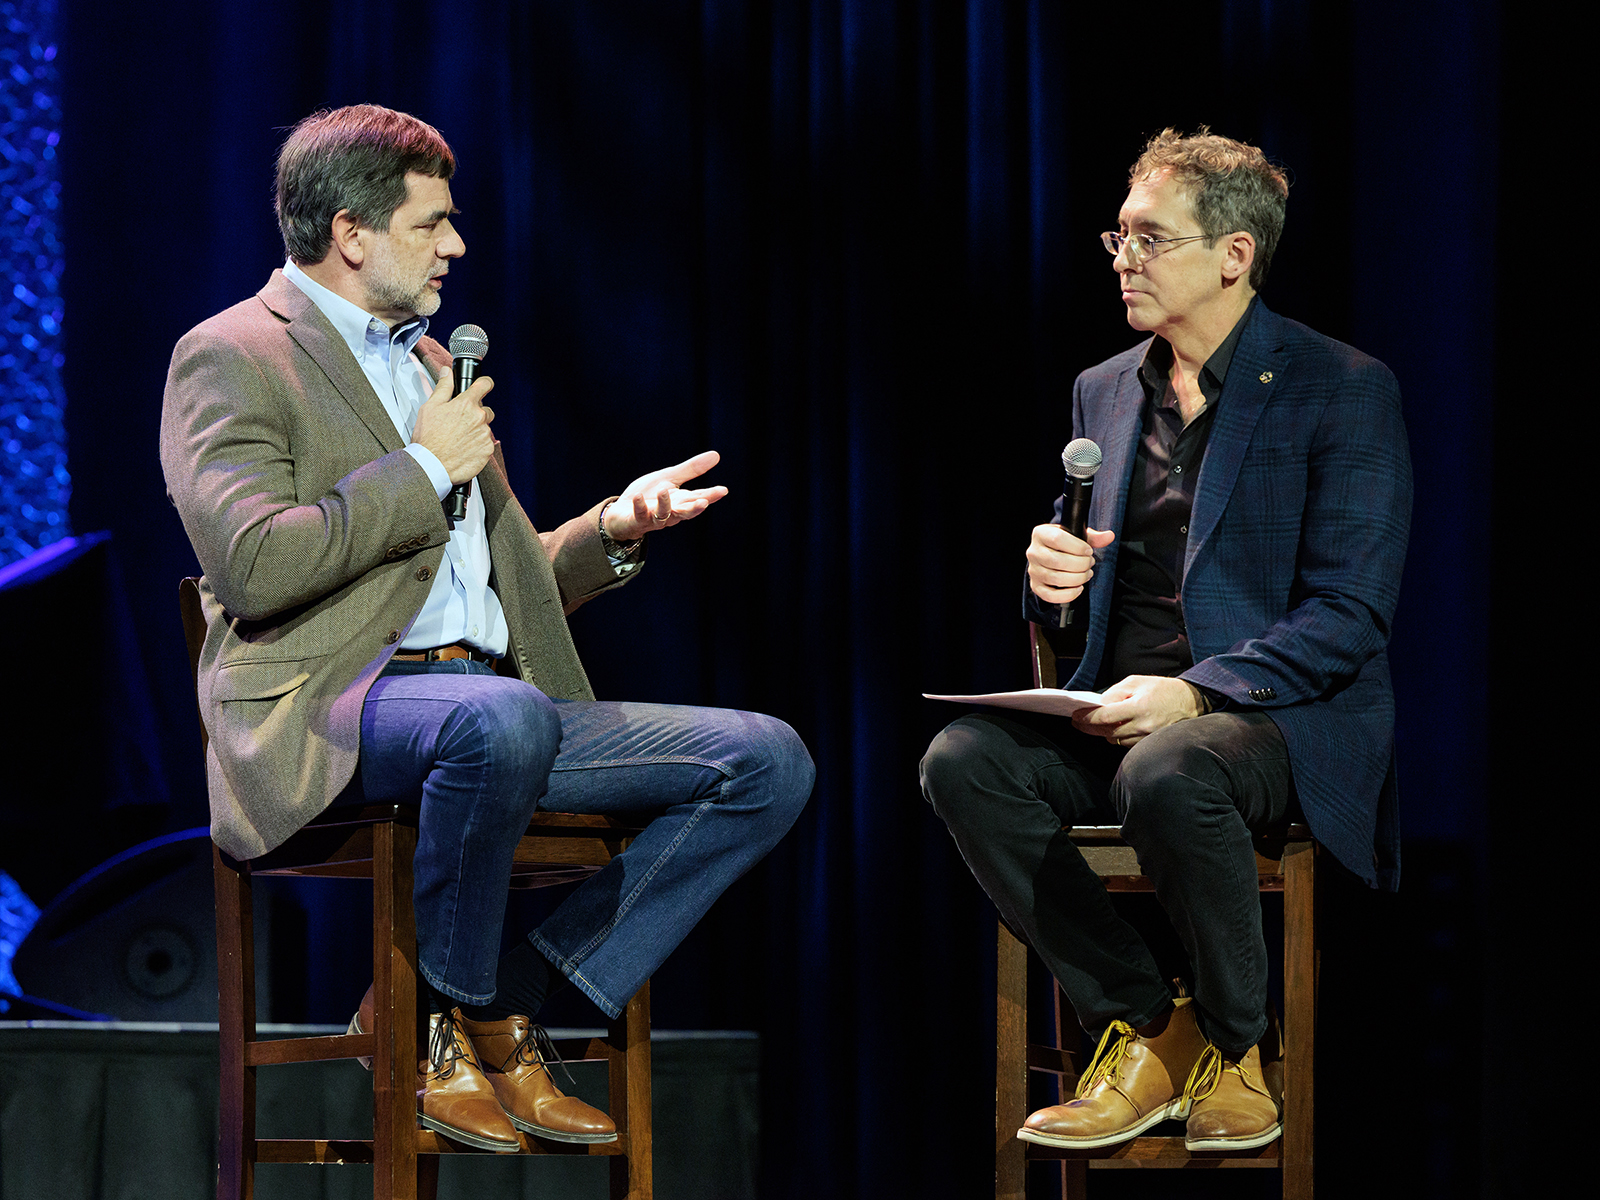 Lee C. Camp, right, interviews Dr. Curt Thompson during a live “No Small Endeavor" Thanksgiving show at Ryman Auditorium, Nov. 20, 2022, in Nashville. (Photo by Eric Brown)